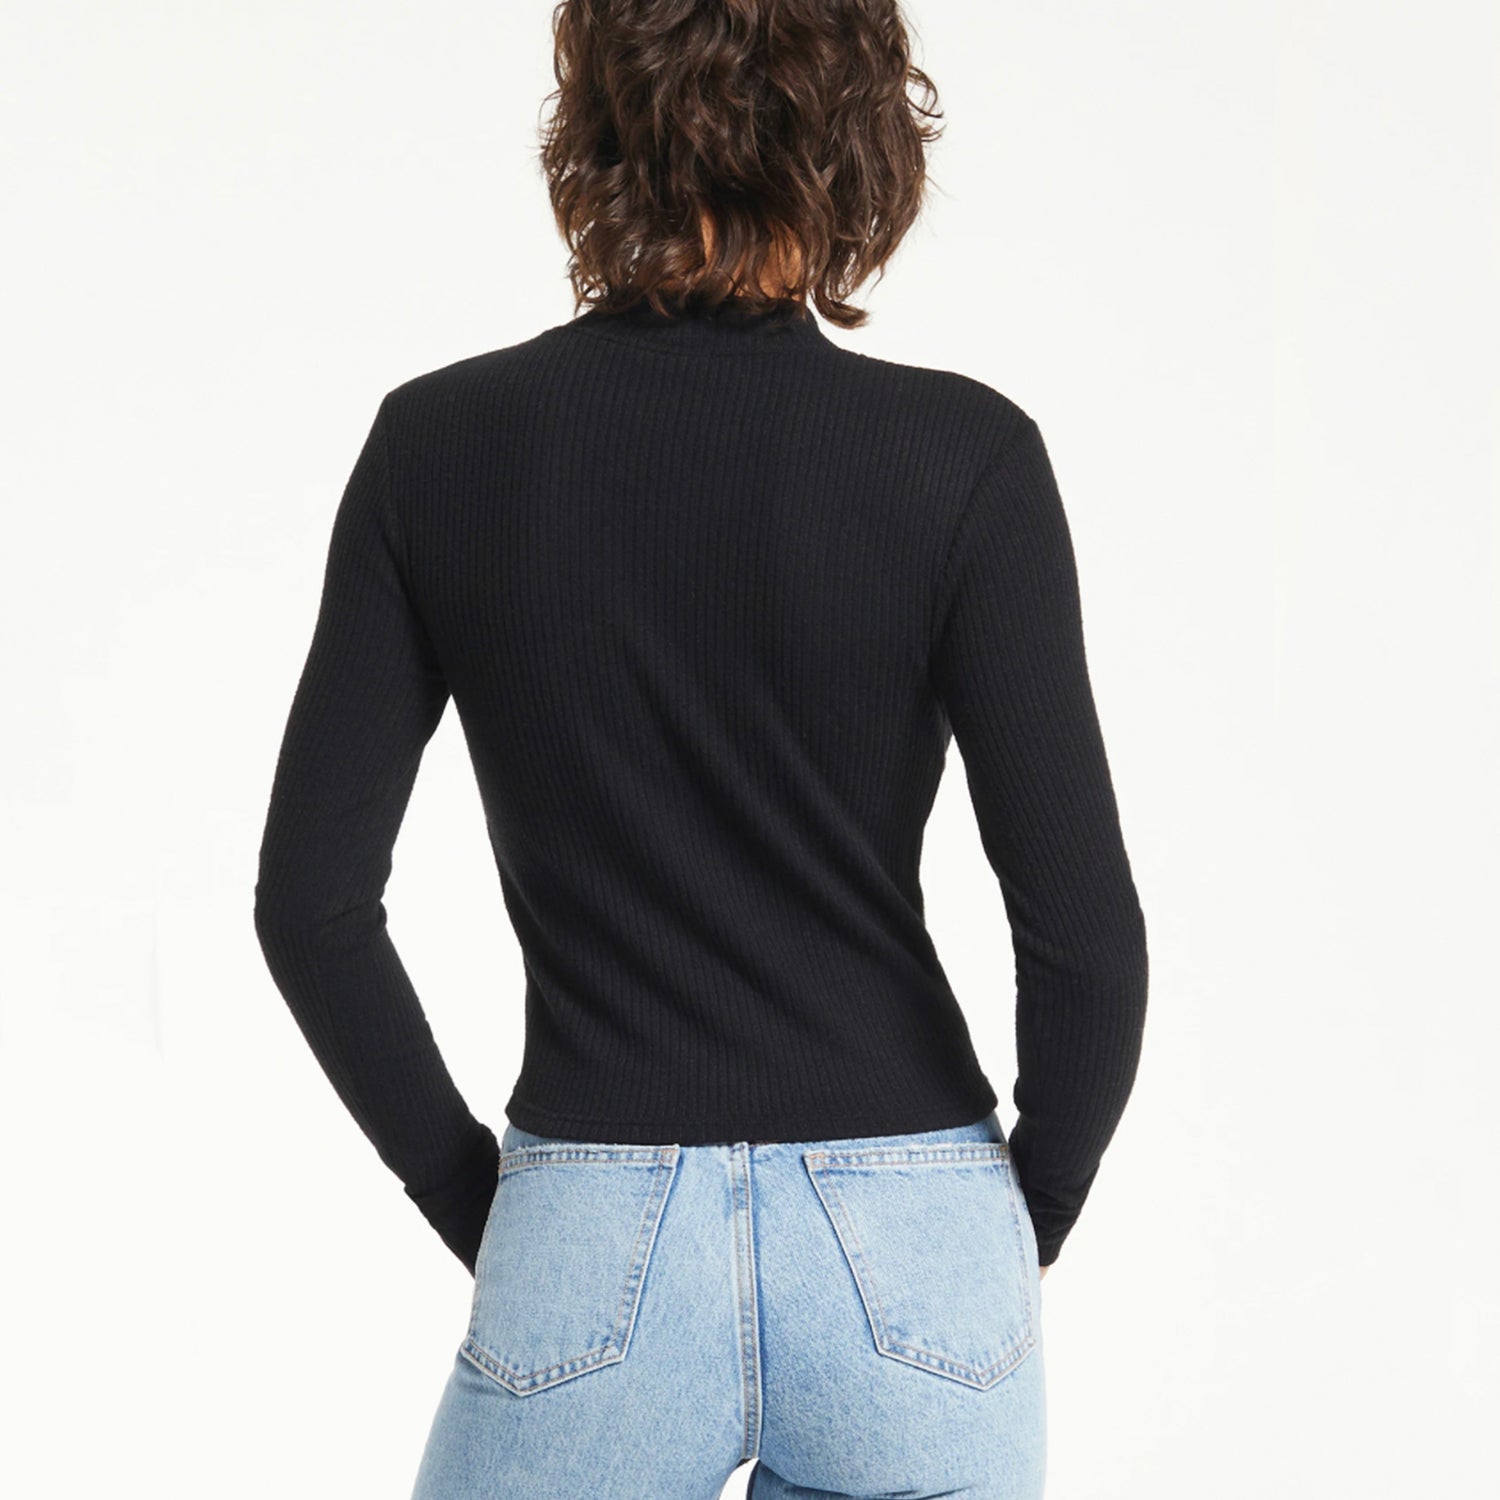 Z Supply Clarke Rib Long Sleeve Top. The soft textured rib creates an elevated, and flattering silhouette. This top will be that effortless addition with its fitted look, mock neck, and cuffed sleeve. Make it that must have!